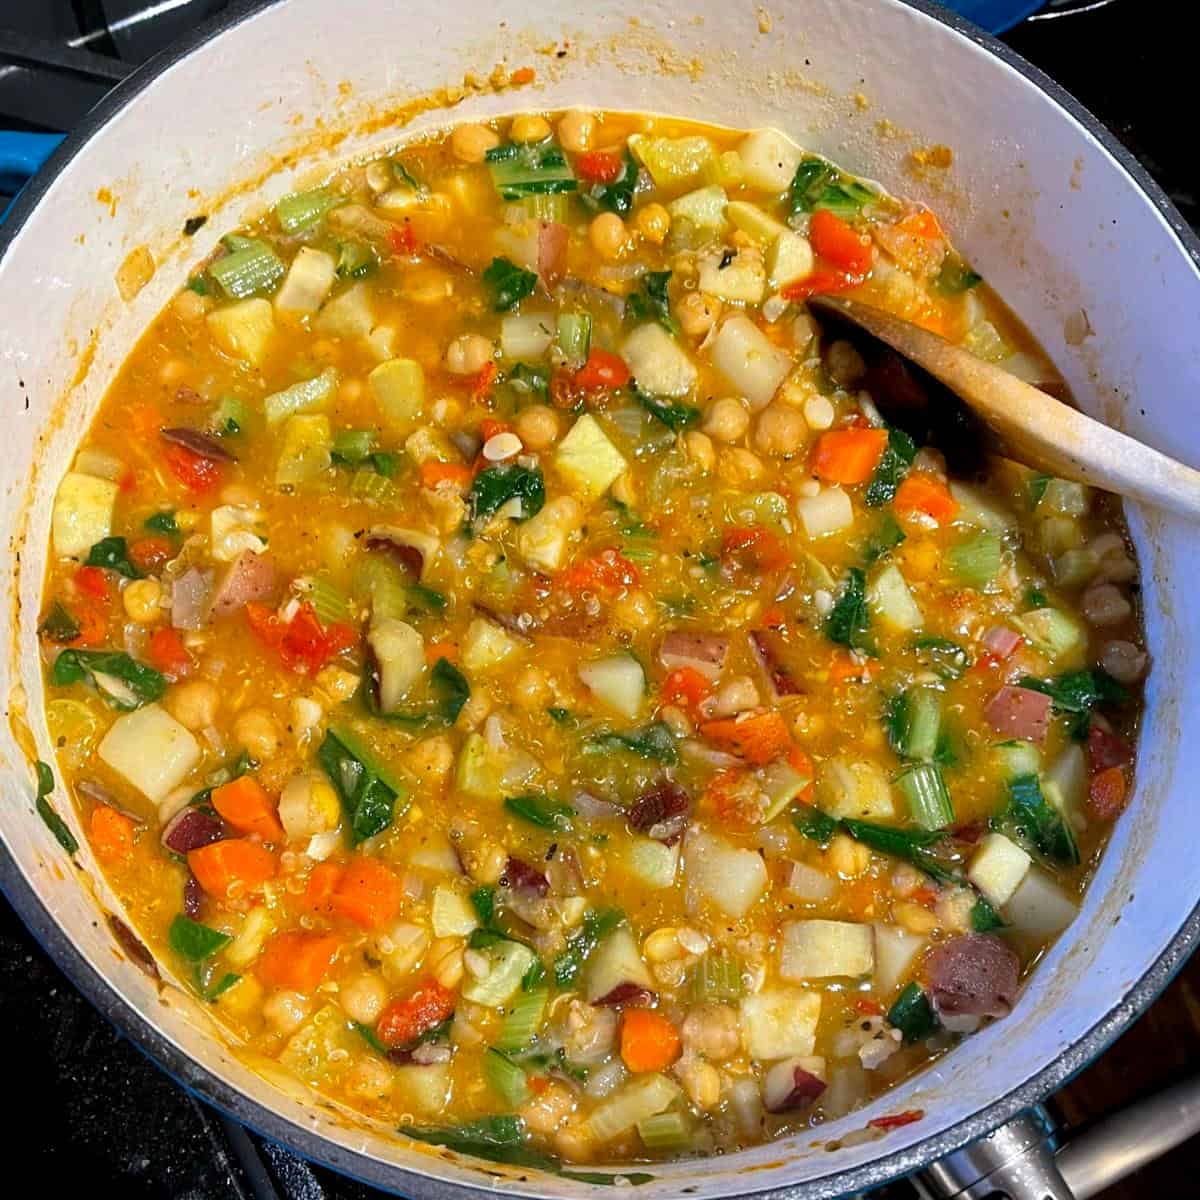 Vegetable stew in final stages of cooking.